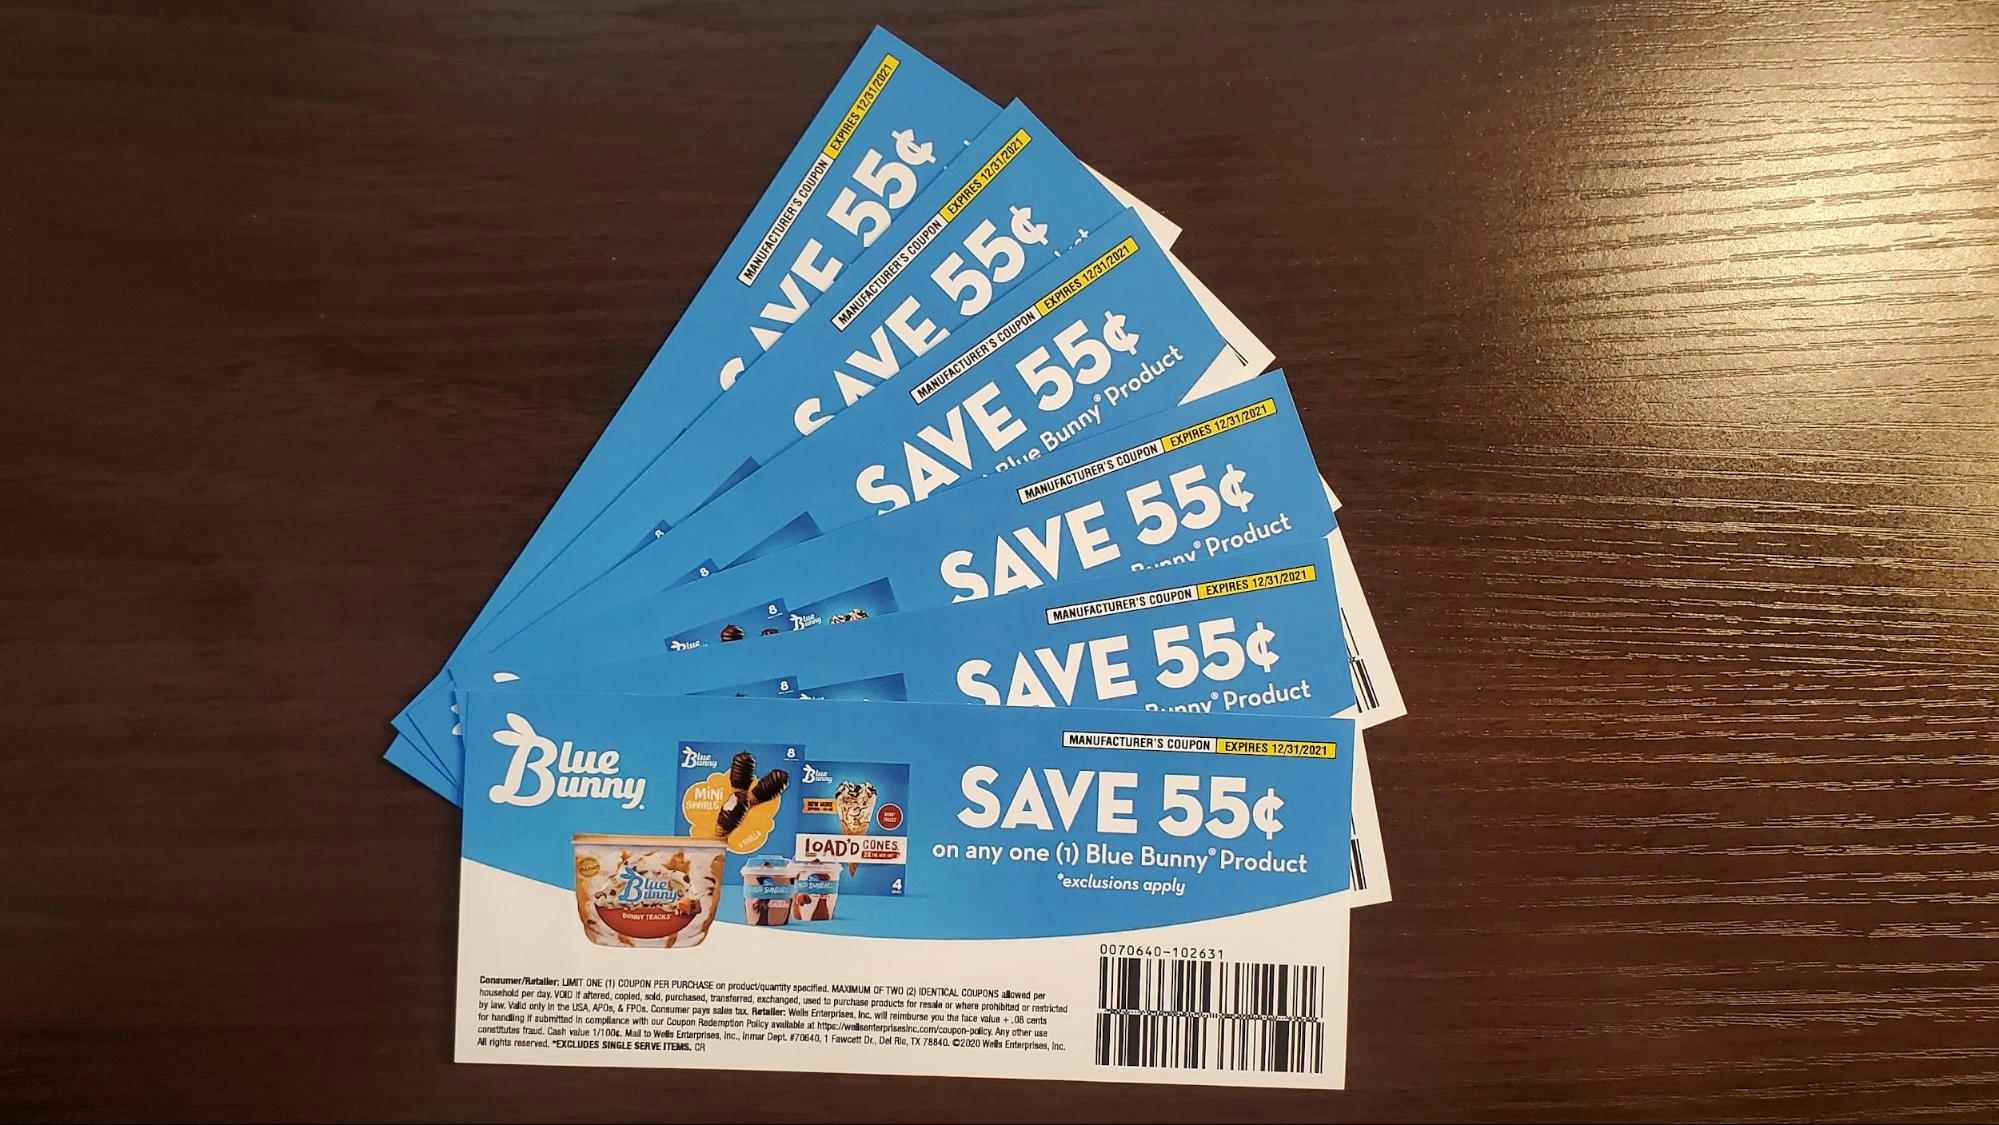 Free Blue Bunny coupons by mail